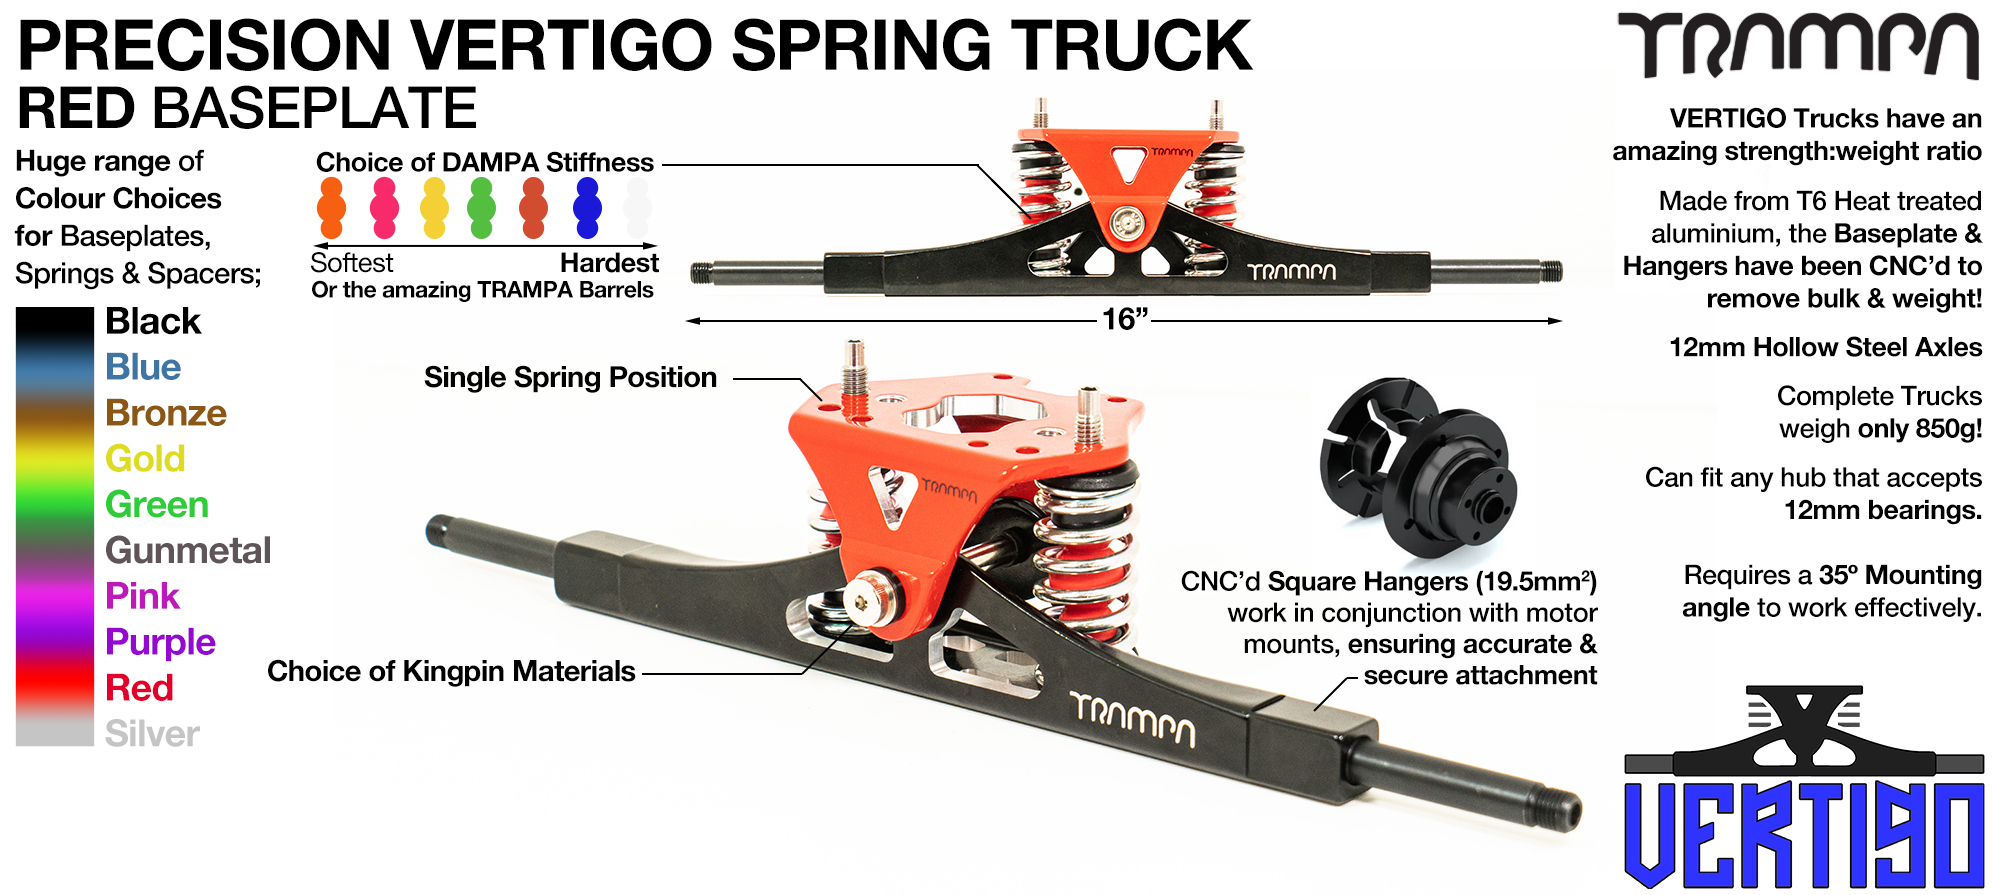 PRECISION CNC VERTIGO Truck RED - 12mm Hollow Axles with Powder-Coated RED CNC baseplate & Steel Kingpin TRAMPA Spring Trucks